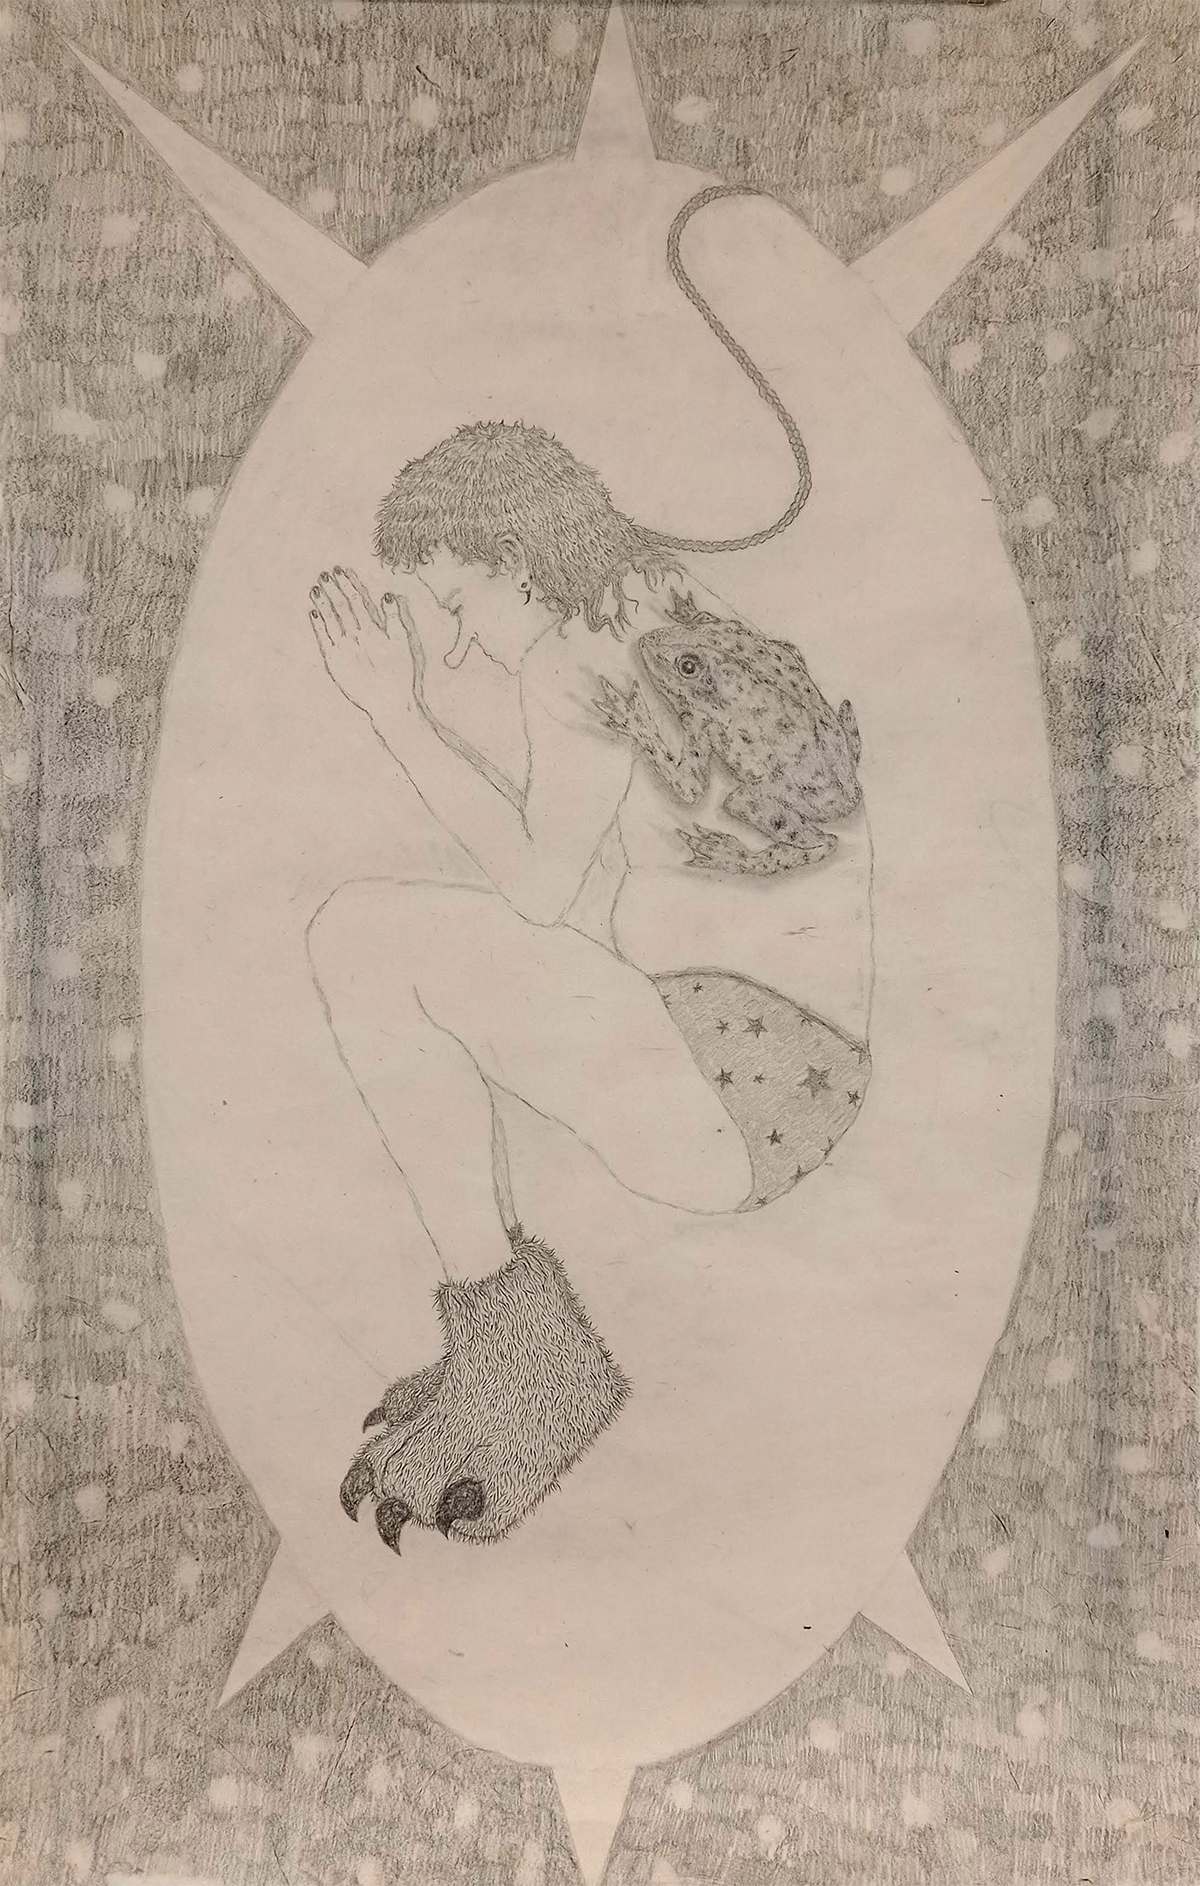 A graphite portrait of a person in starry pants with large furry feet, curled up with a frog on their back.